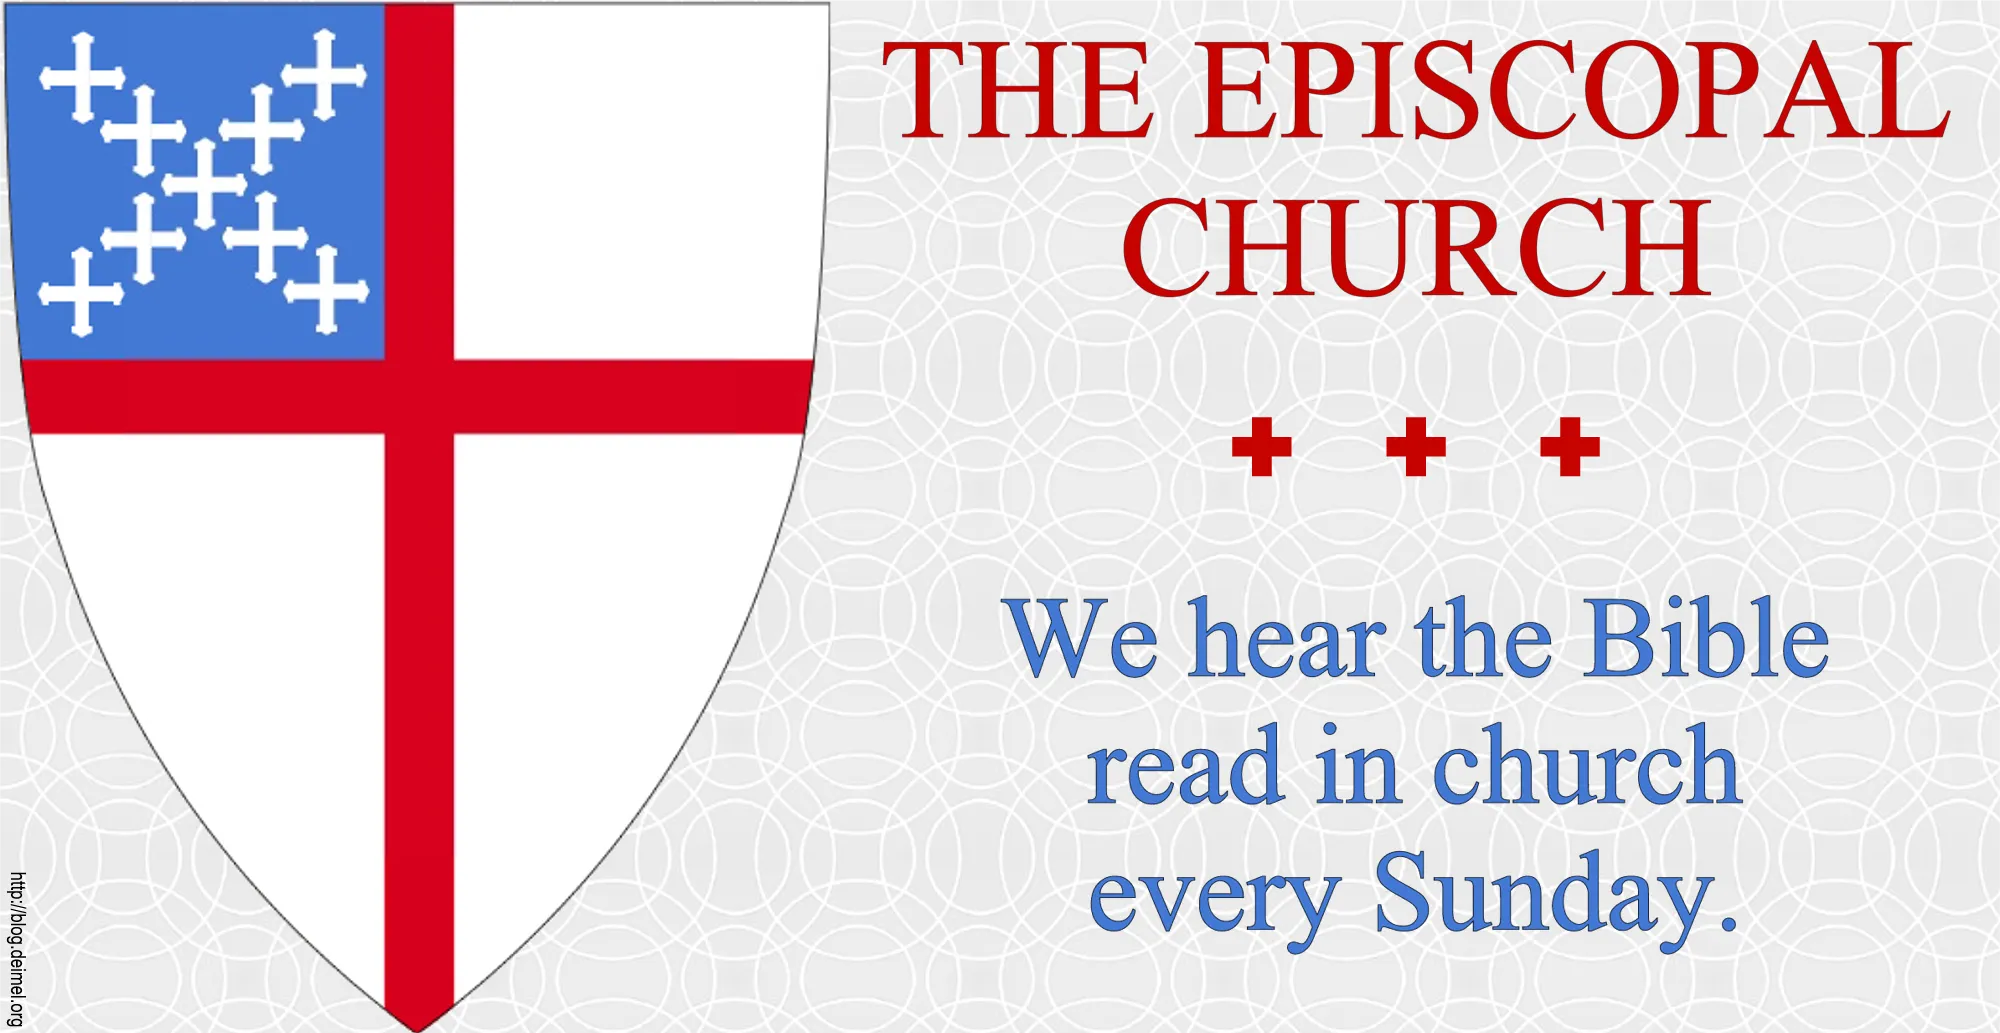 which bible does the episcopal church use